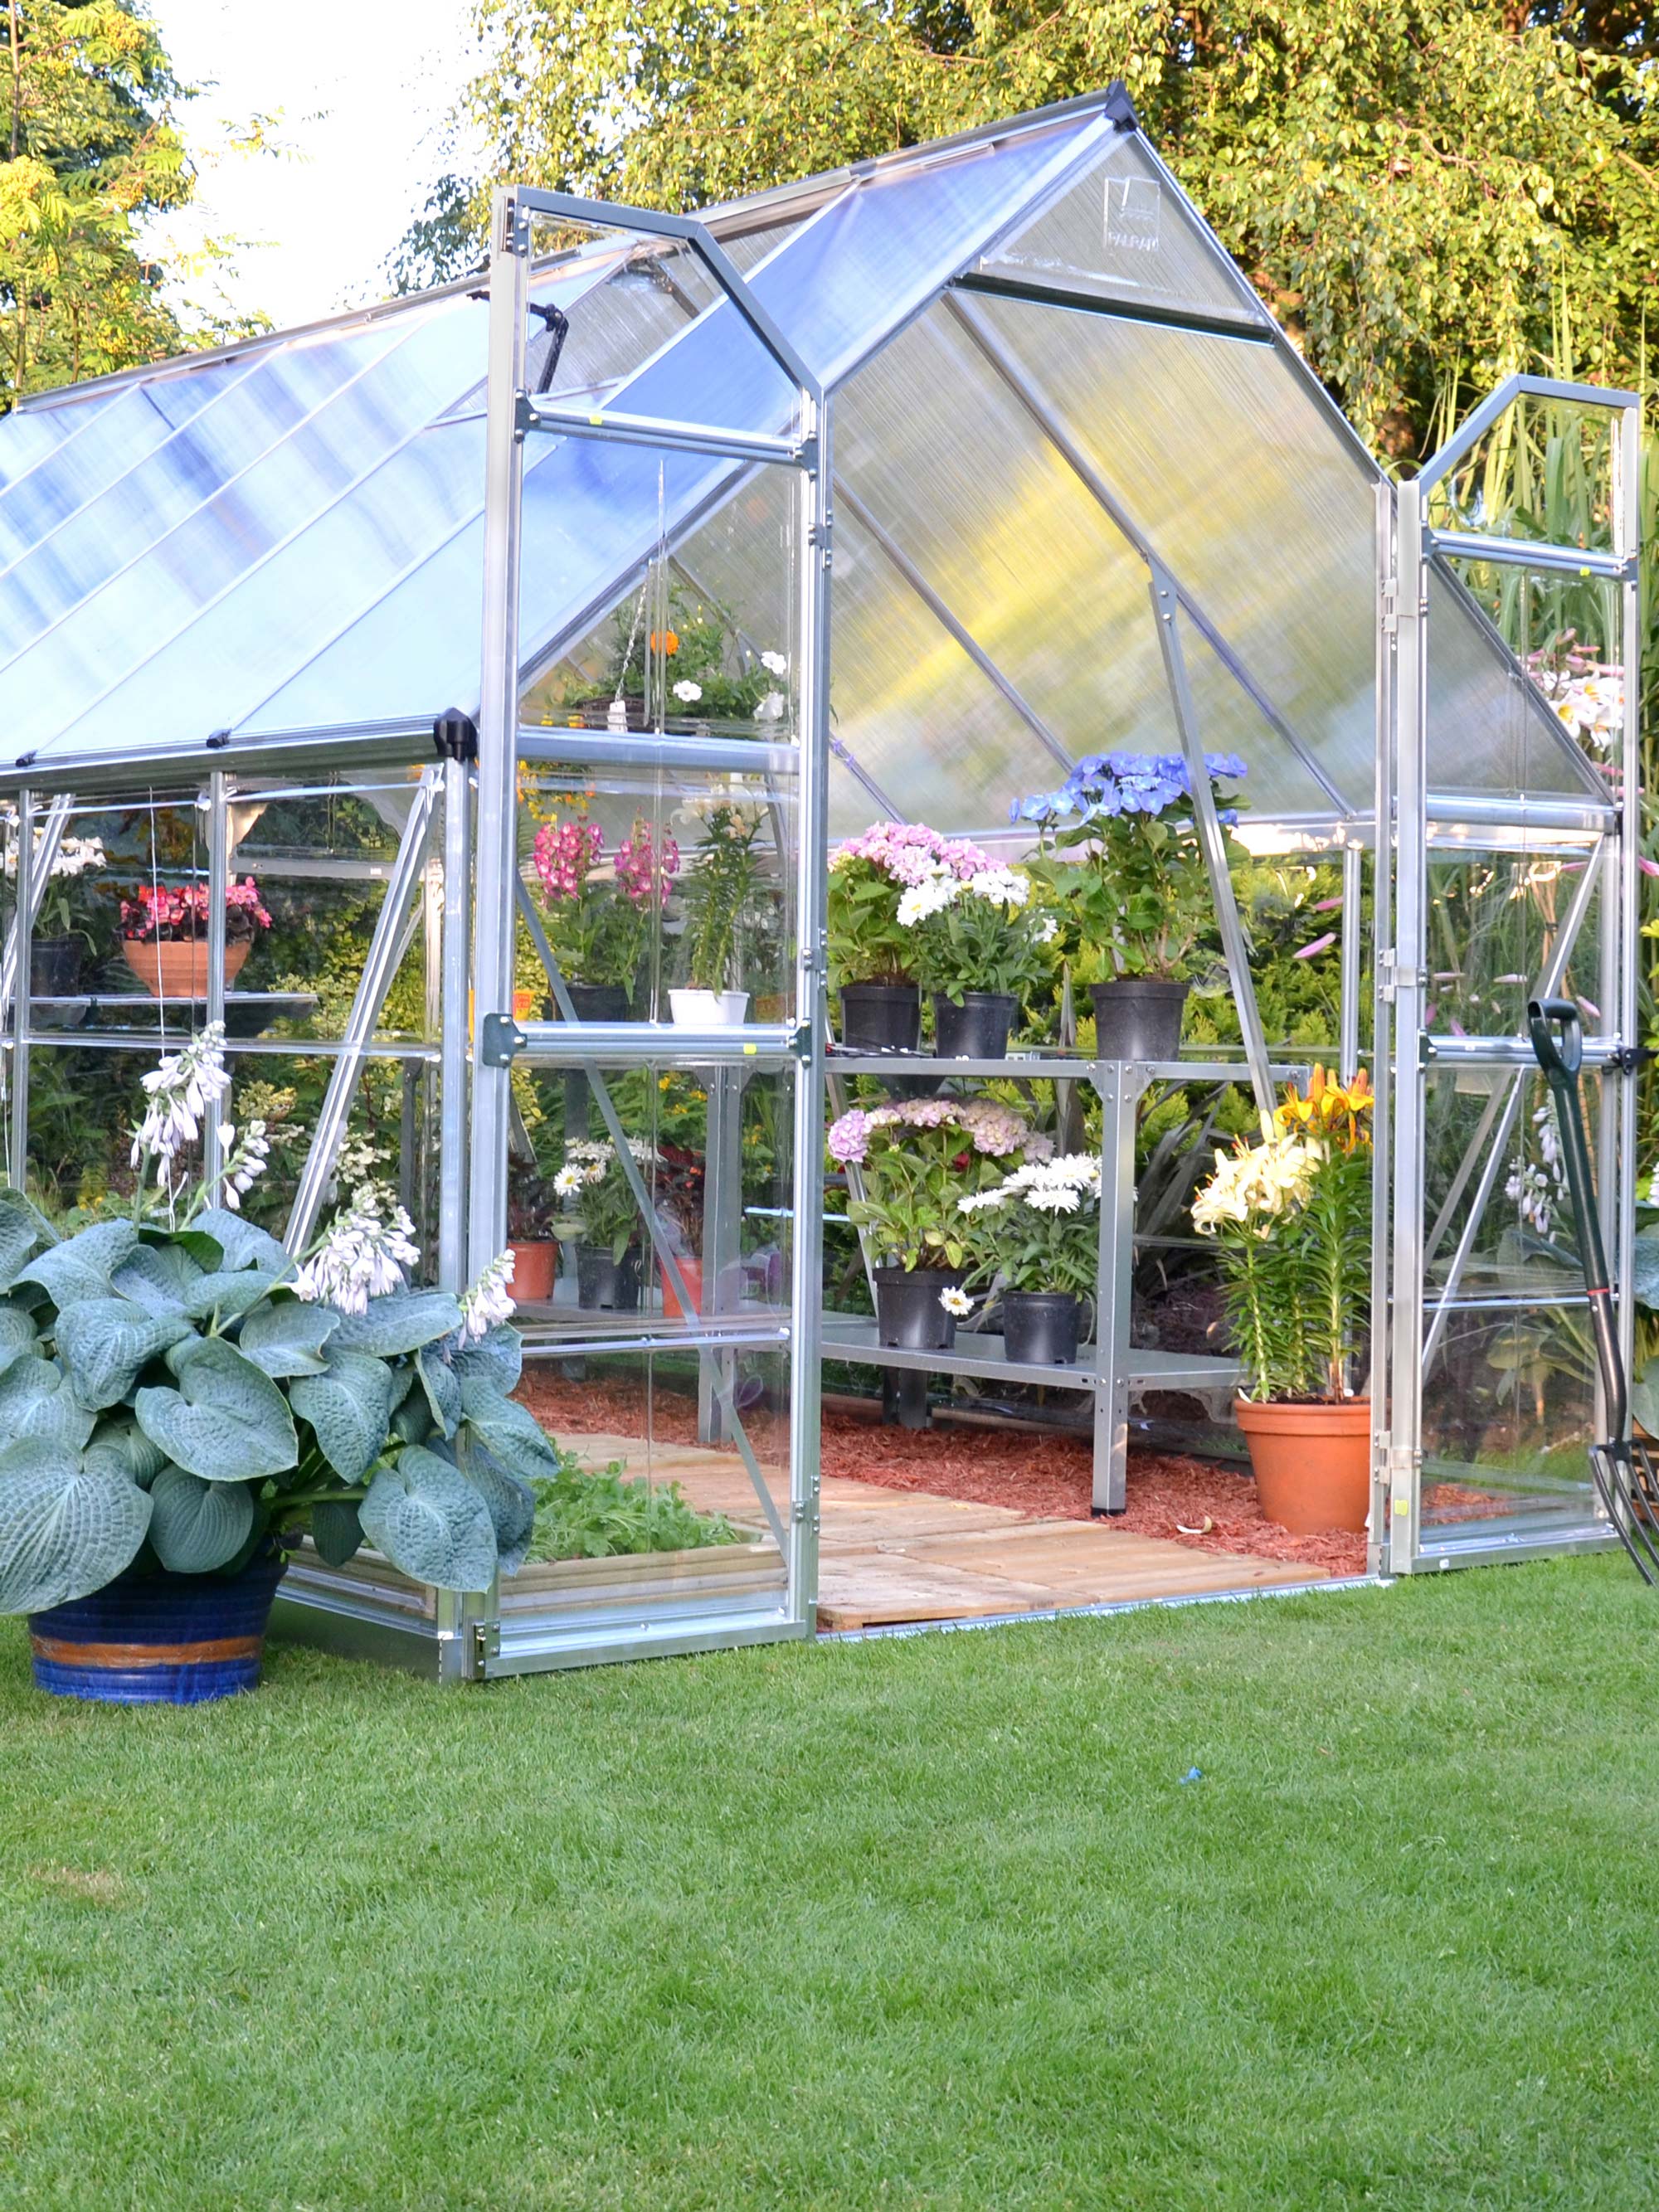 Greenhouses: Greenhouse Kits and Supplies | Gardener's Supply